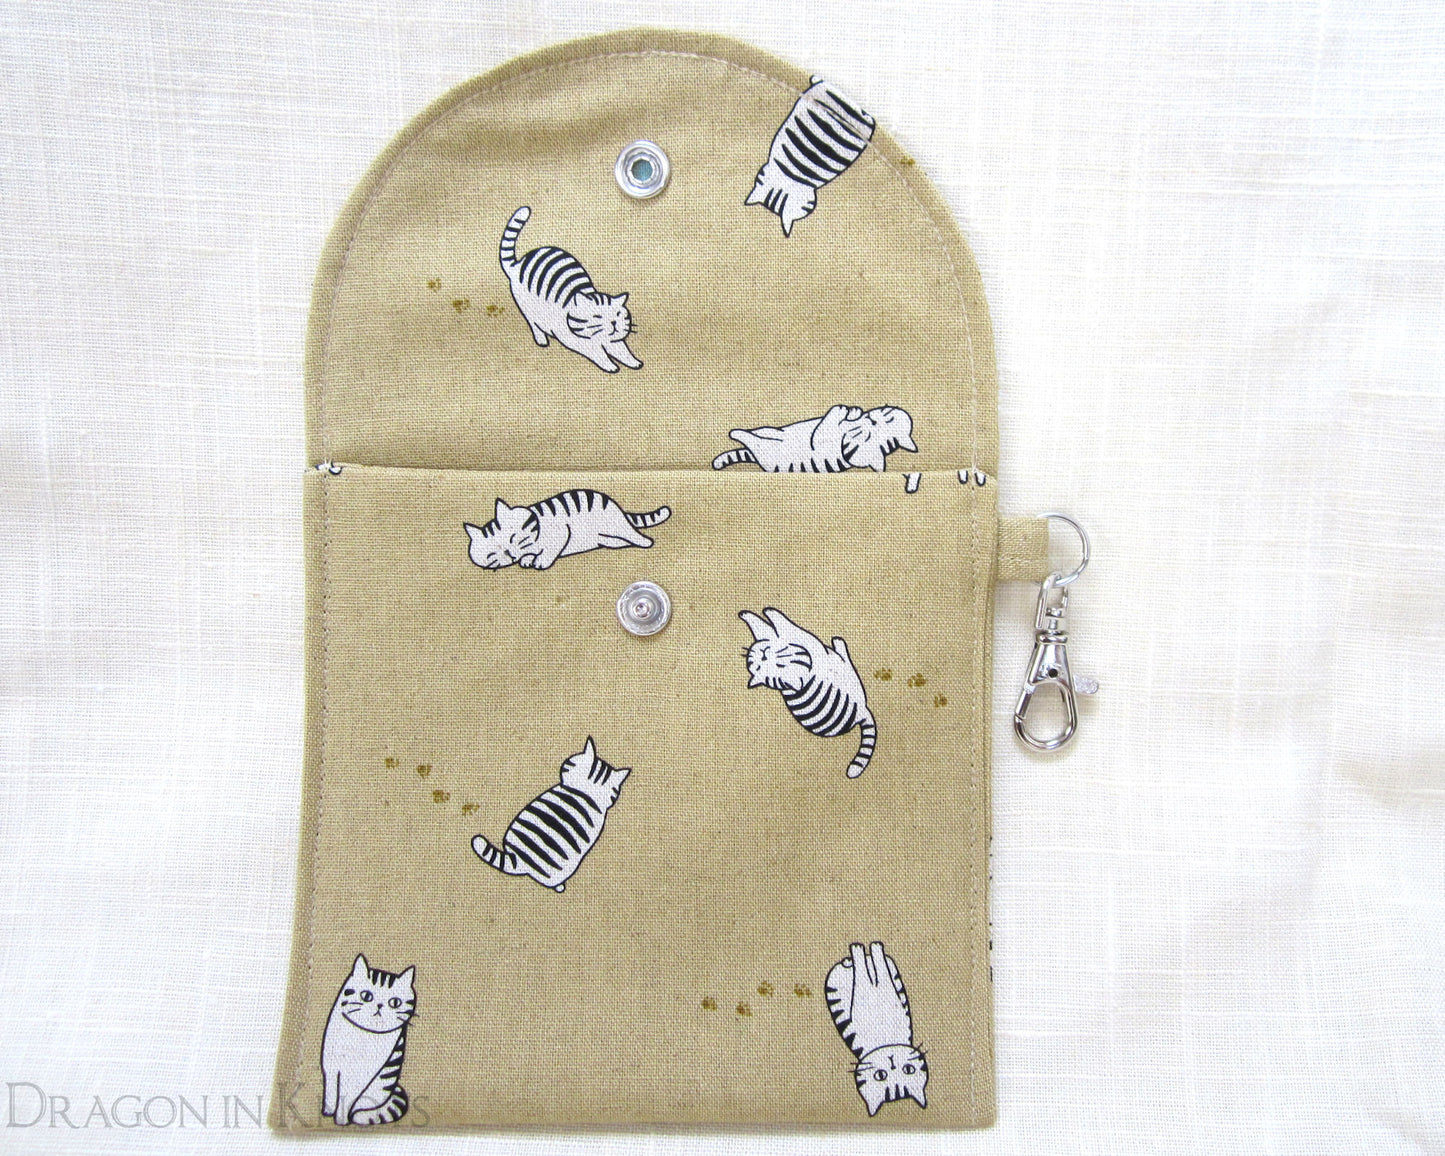 Striped Cats 5in Accessory Pouch - Dragon in Knots, handmade in USA